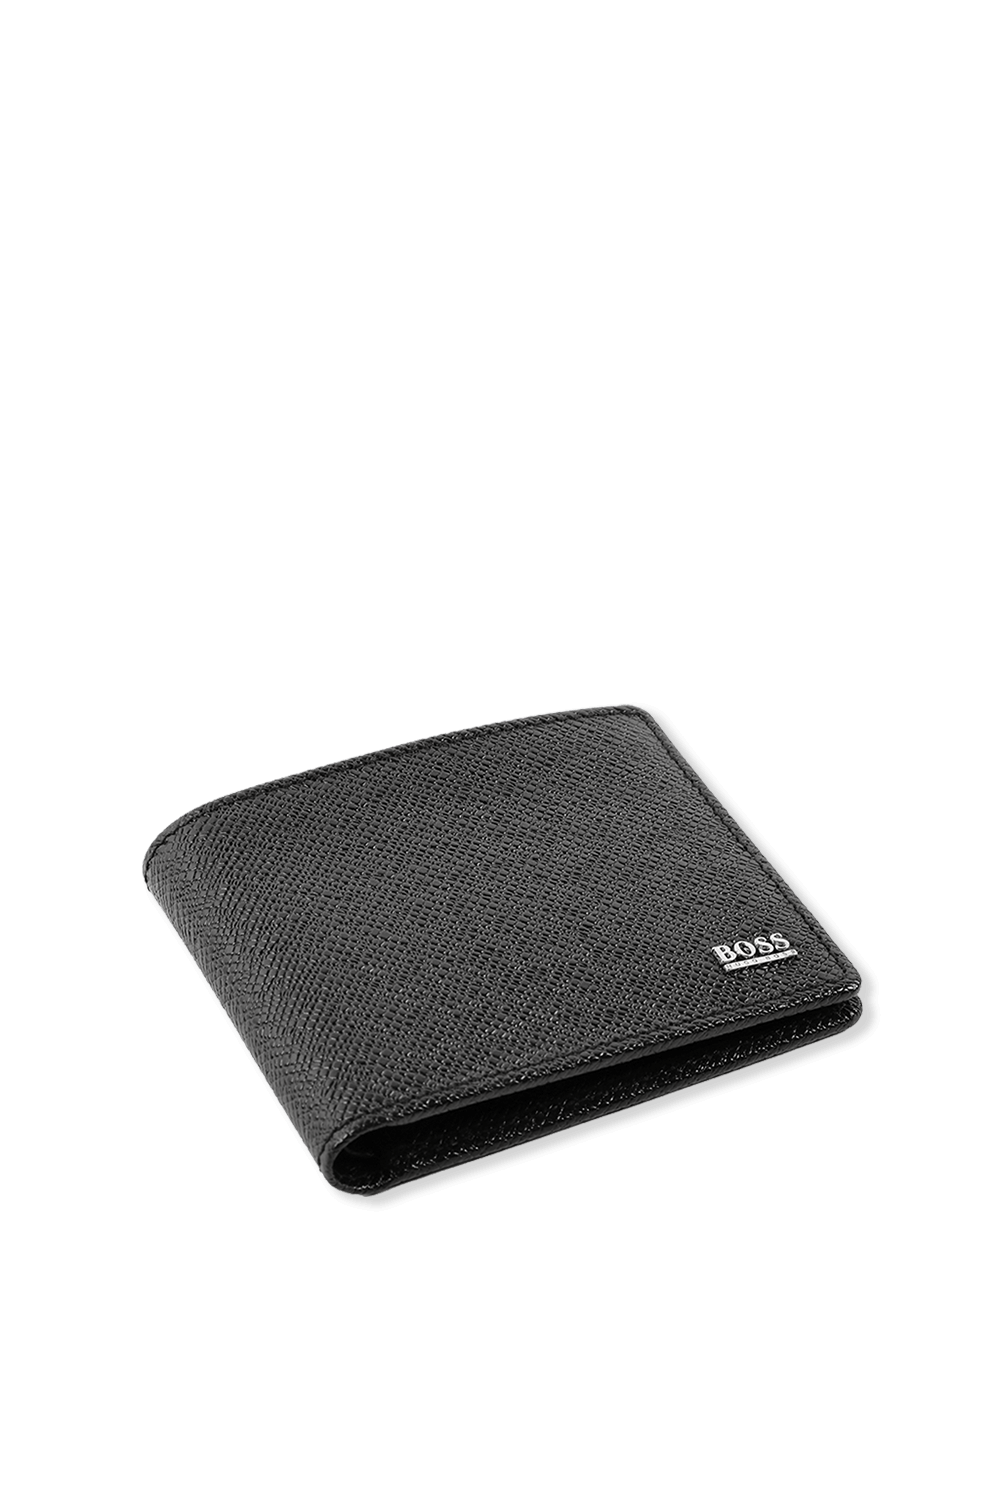 Signature Grainy Leather 6 cc Wallet In Black  BOSS